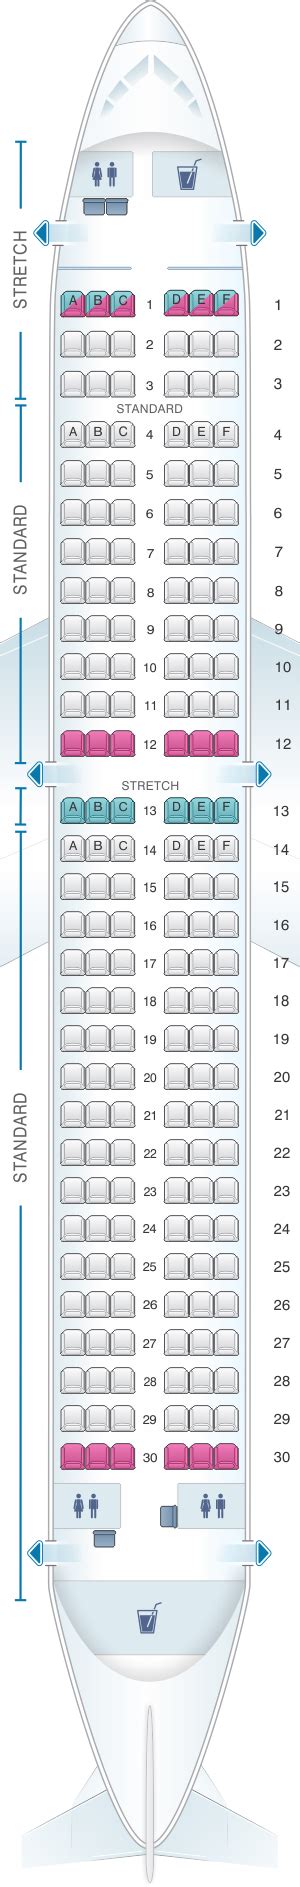 30 Frontier Airlines Seat Map Maps Database Source